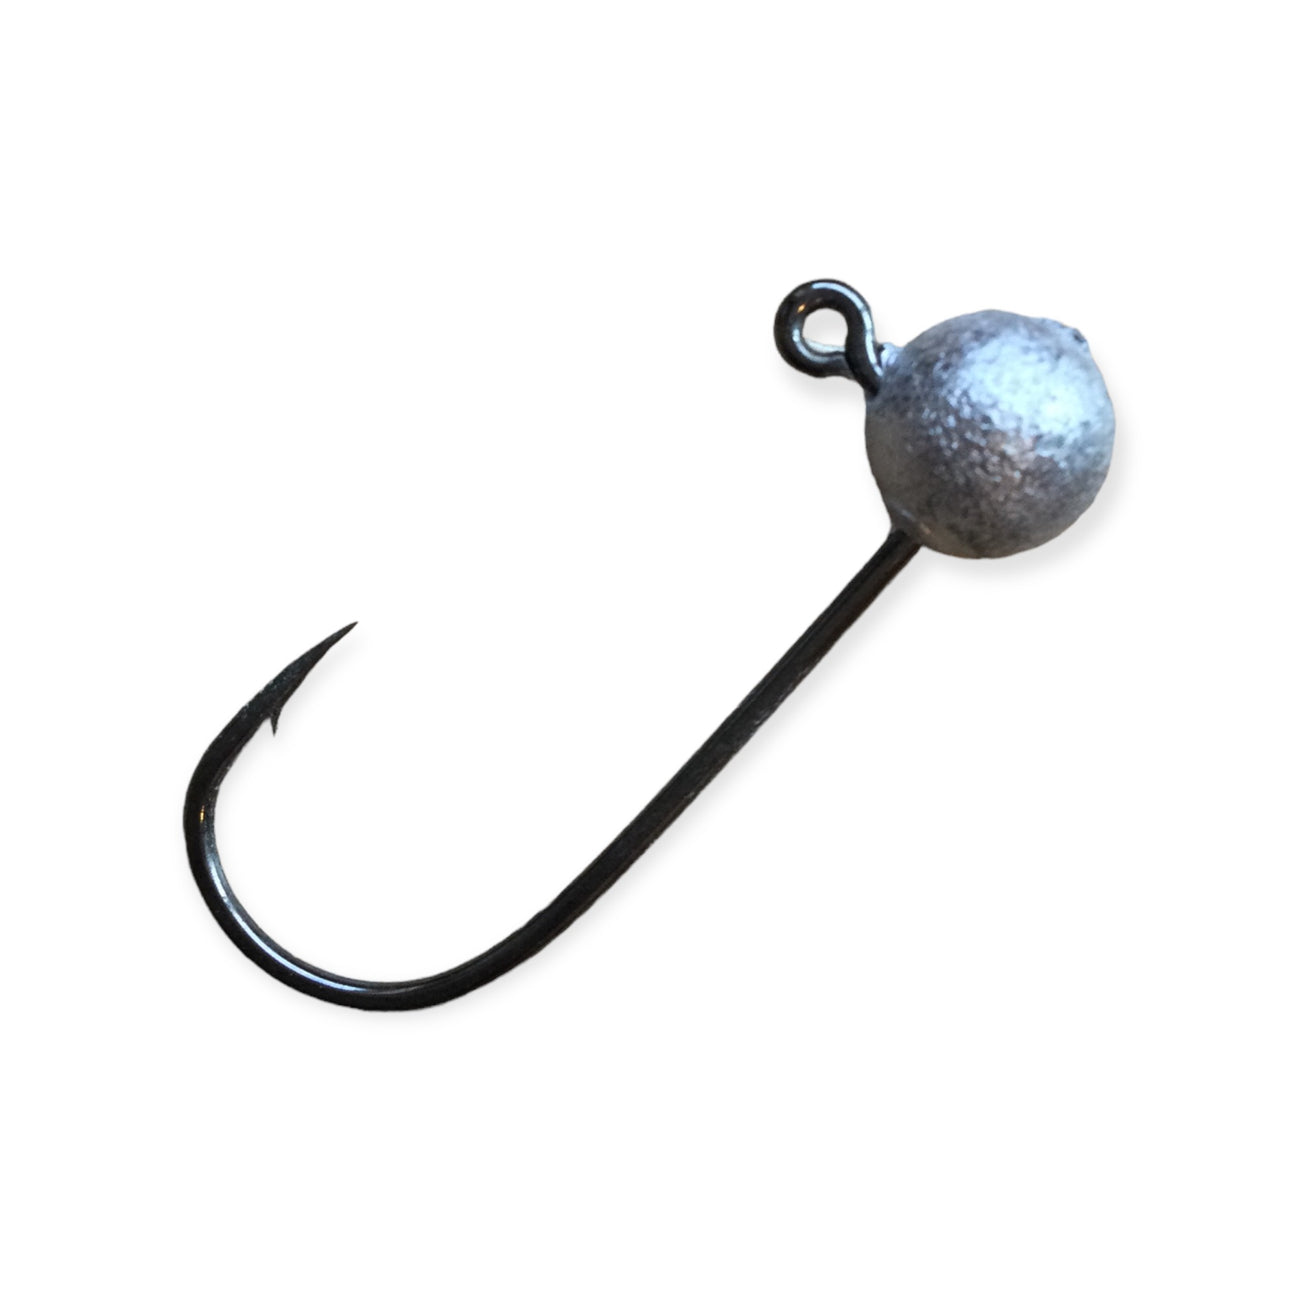 570R Red Jig Hooks - 100 Pack 1X Strong 90 Degree RB Jig Hook - Red 4/0 :  : Sports, Fitness & Outdoors